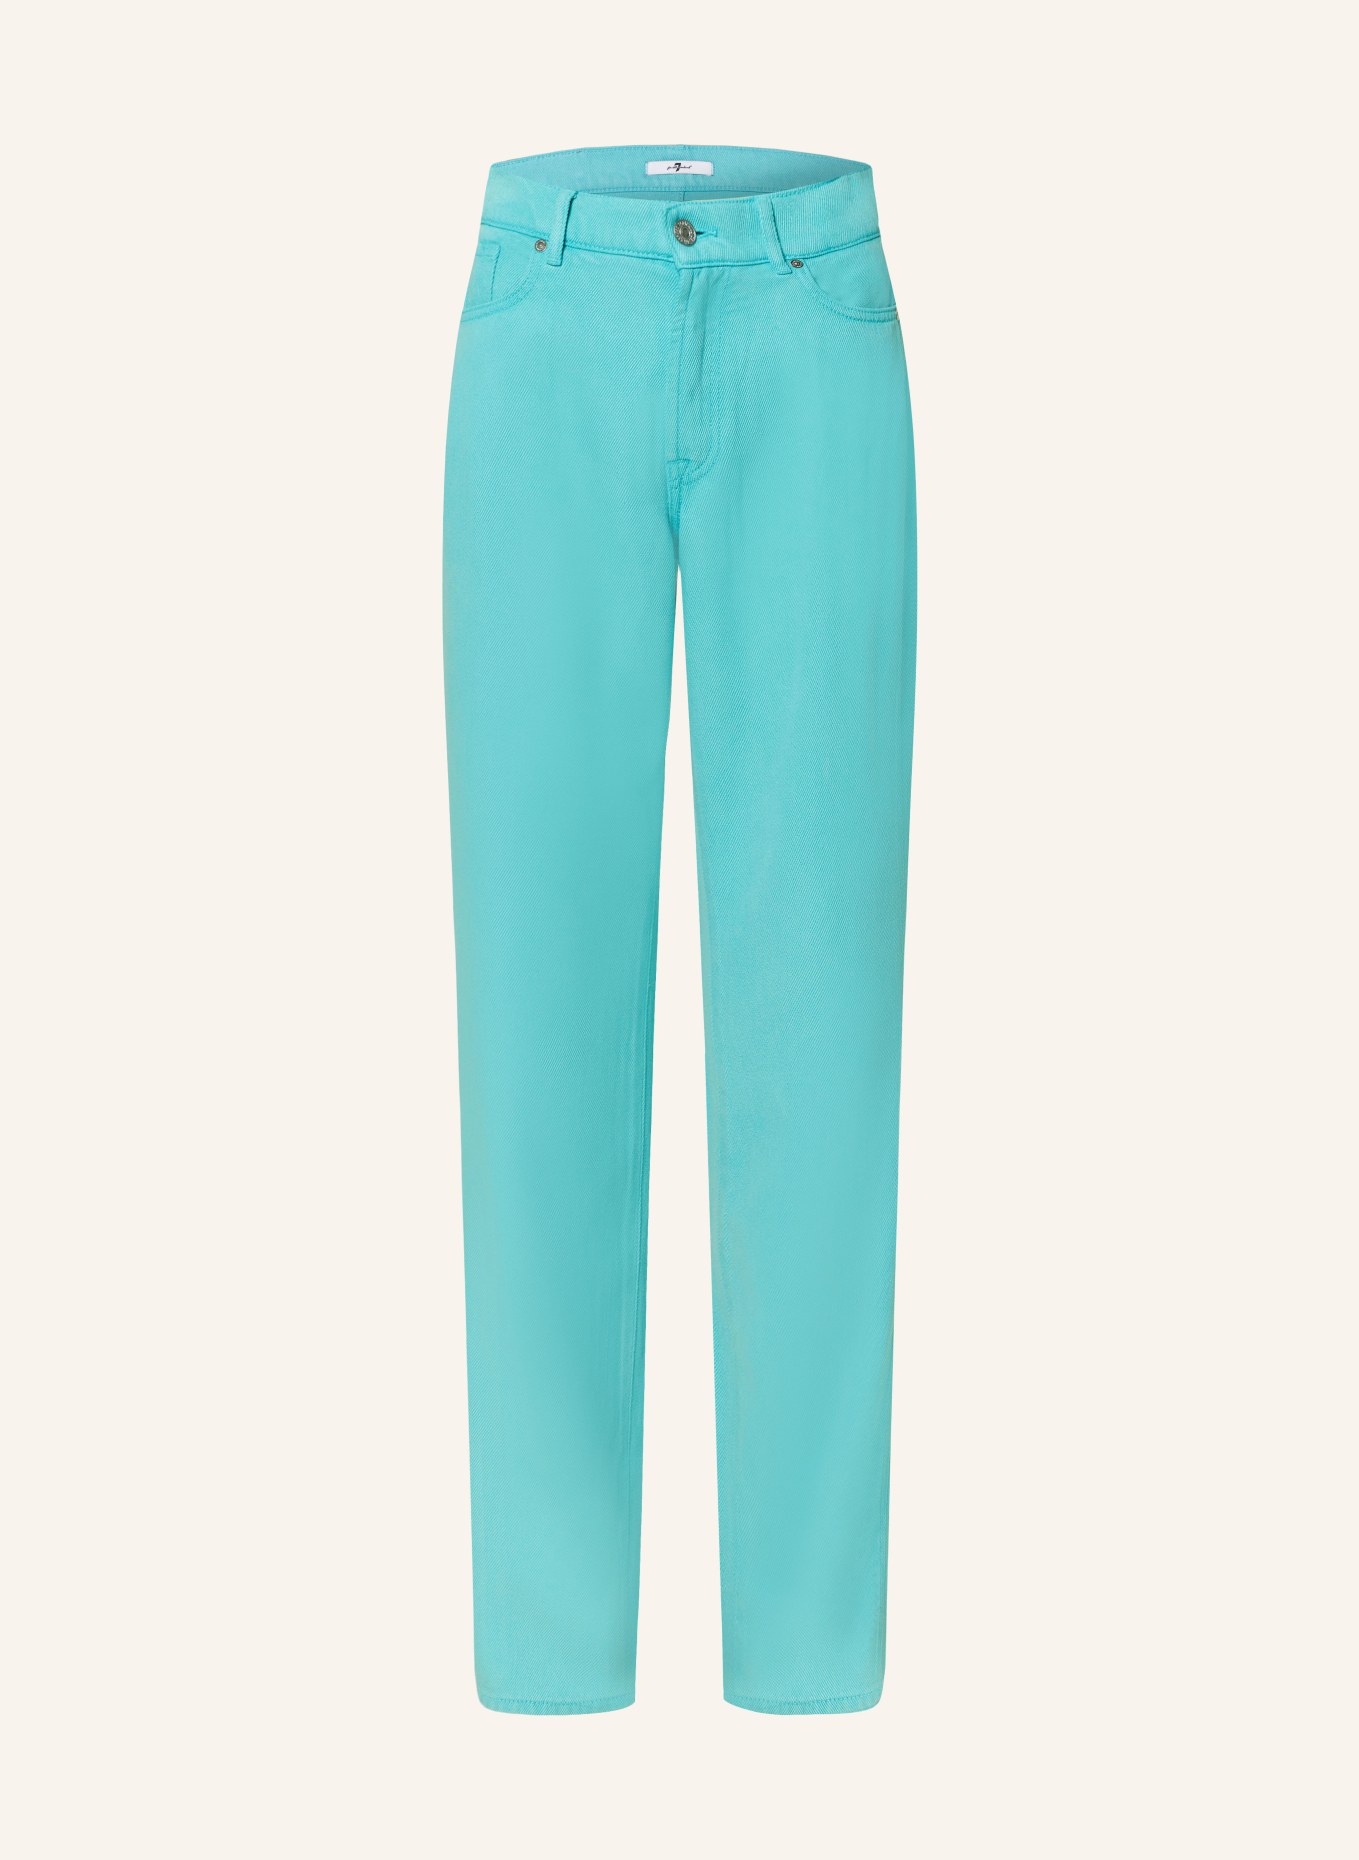 7 for all mankind Flared Jeans TESS, Farbe: BLUE (Bild 1)